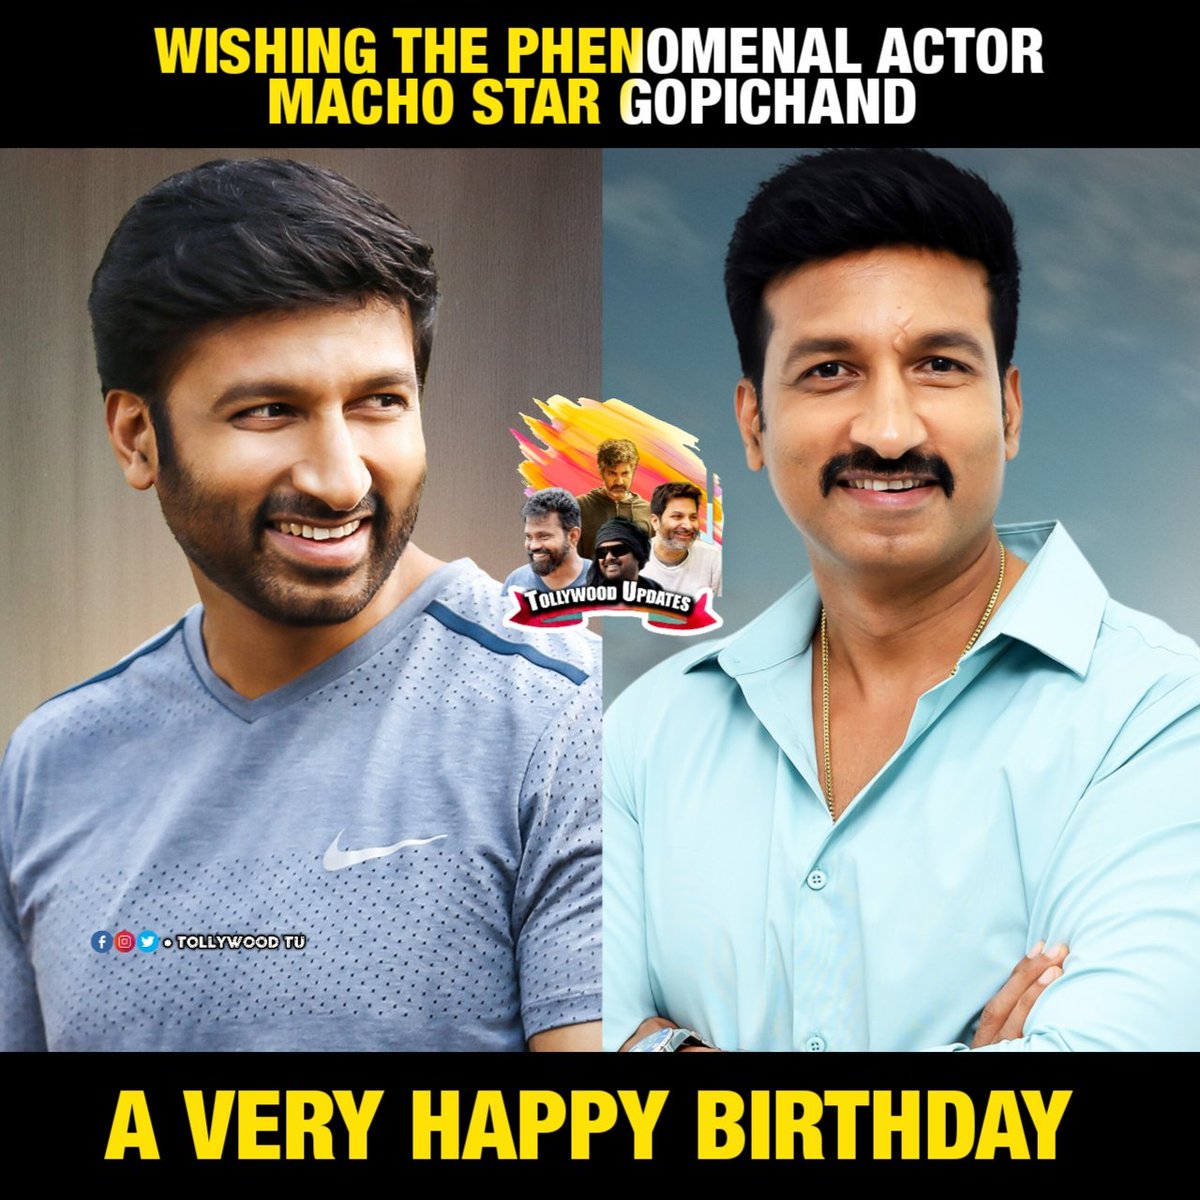 Birthday wishes to the highly talented actor #Gopichand 🎉🎉

#HBDGopichand #Gopichand31